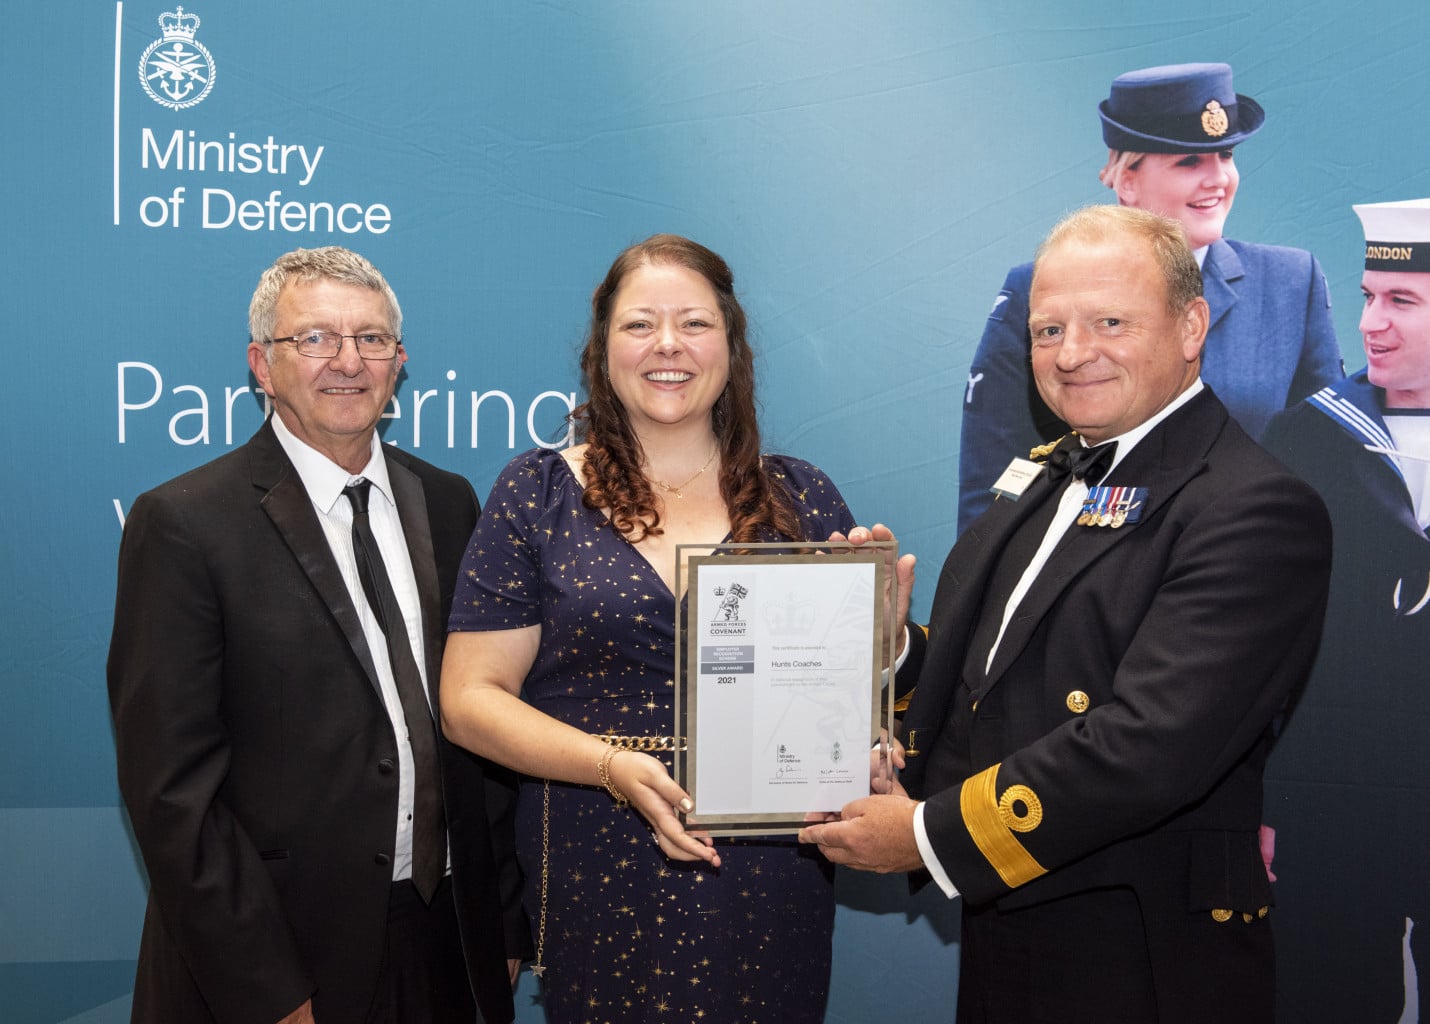 Hunts Coaches team receives award for Armed Forces work